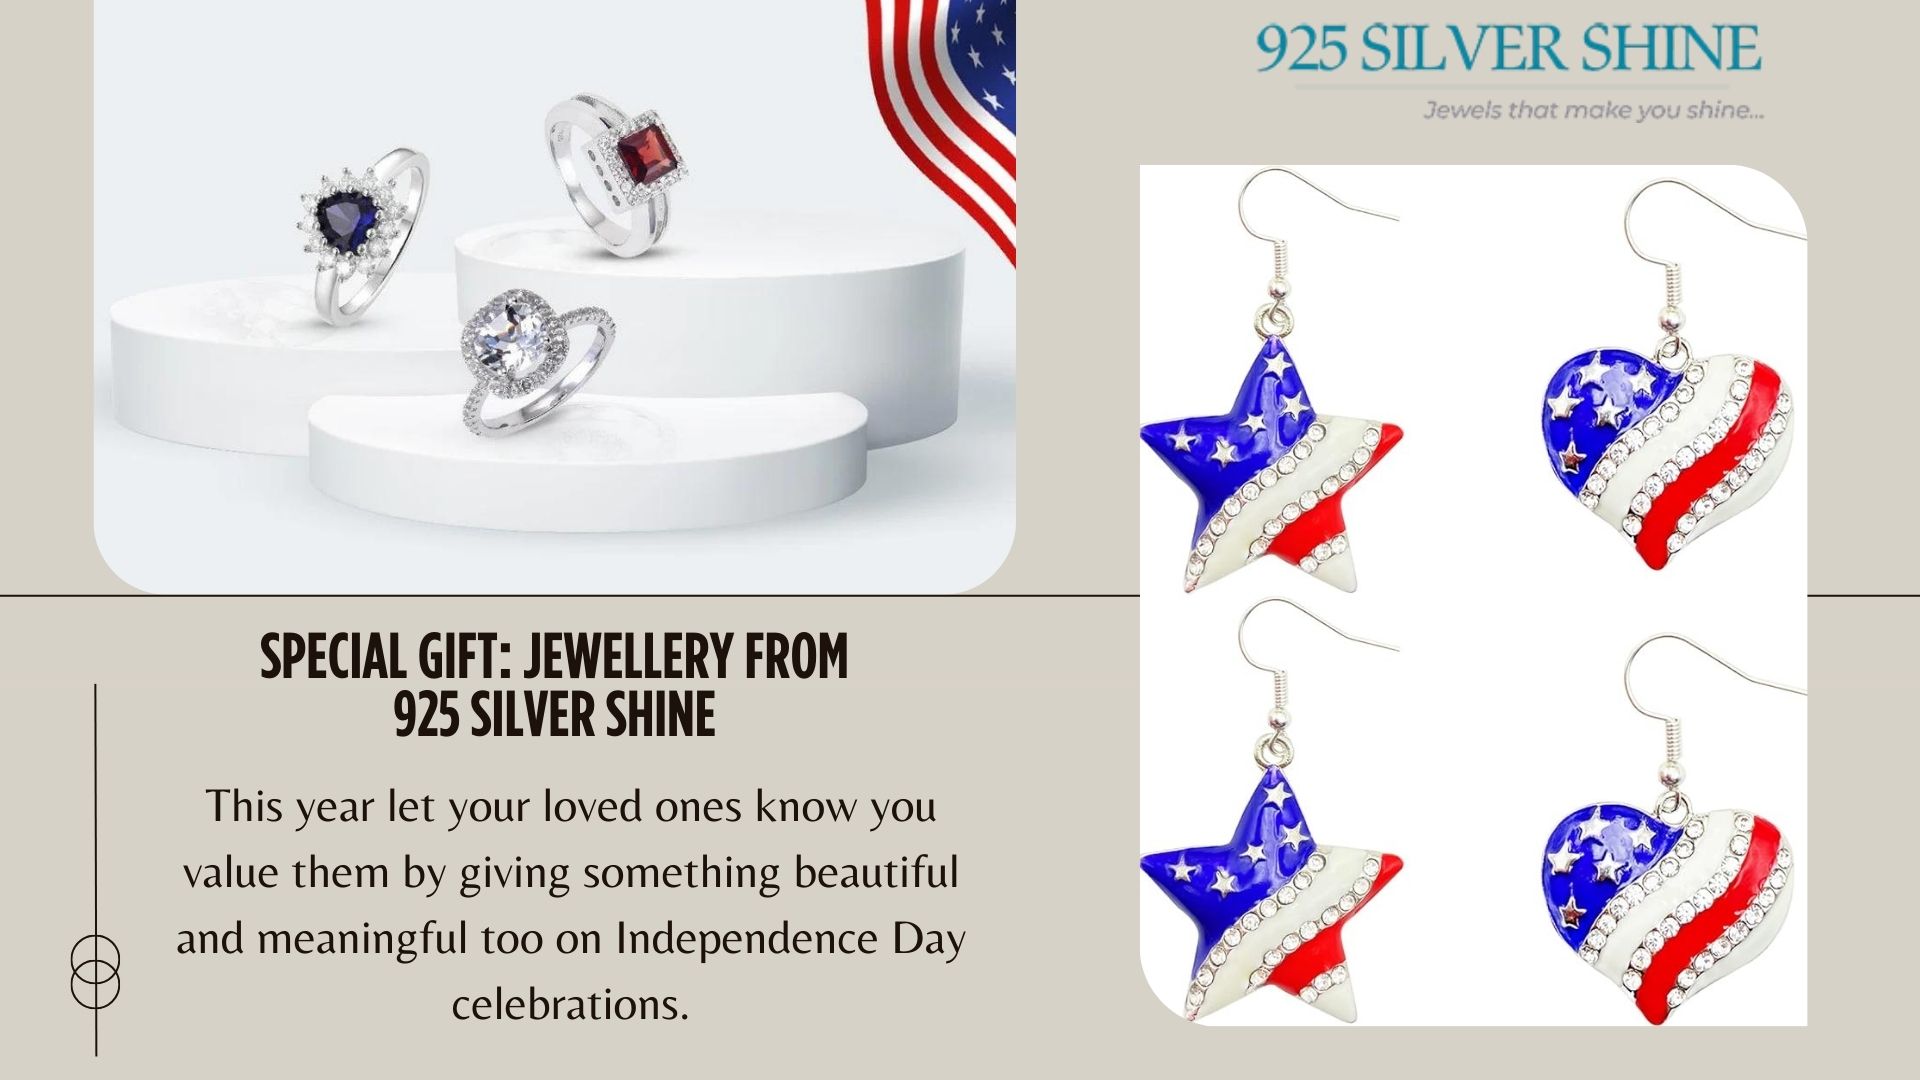 Independence Day, us independance day, day of fourth july, celebrate the us independance day, fourth of july independence day, independence day of us, day of independence america, happy us independence day, day of the week july 4 1776, 4th of july holiday day, us independence day celebration, independence day 4th of july jewelry gift , silver ring gift for independence day, independence day 4th of july history, how many countries celebrate independence day, fourth of july day jewelry sales, sterling silver jewelry for festival, which countries are celebrating independence day today, us independence day 2024 holiday, united states independence day is july 4, 5 facts about us independence day, fun facts about us independence day, us independence day bank holiday, us independence day social media post, us stock market independence day, us independence day outfit, buy silver jewelry for us independence day 50% discount, america independence day celebrate india, us independence day sale 2024, united states independence day jewelry gift for your family, friends, fourth of july day activities, independence day 4th of july facts and history
 give jewelry gift on 4th of july, jewelry gift for wife, childrens jewelry, jewelry gift for best friend, 4th of july jewelry sale, jewelry gift for daughter on 4th of july, jewelry gift for 16 year old, jewelry gift for 50 year old woman independance day, jewelry for 9 year old girl"